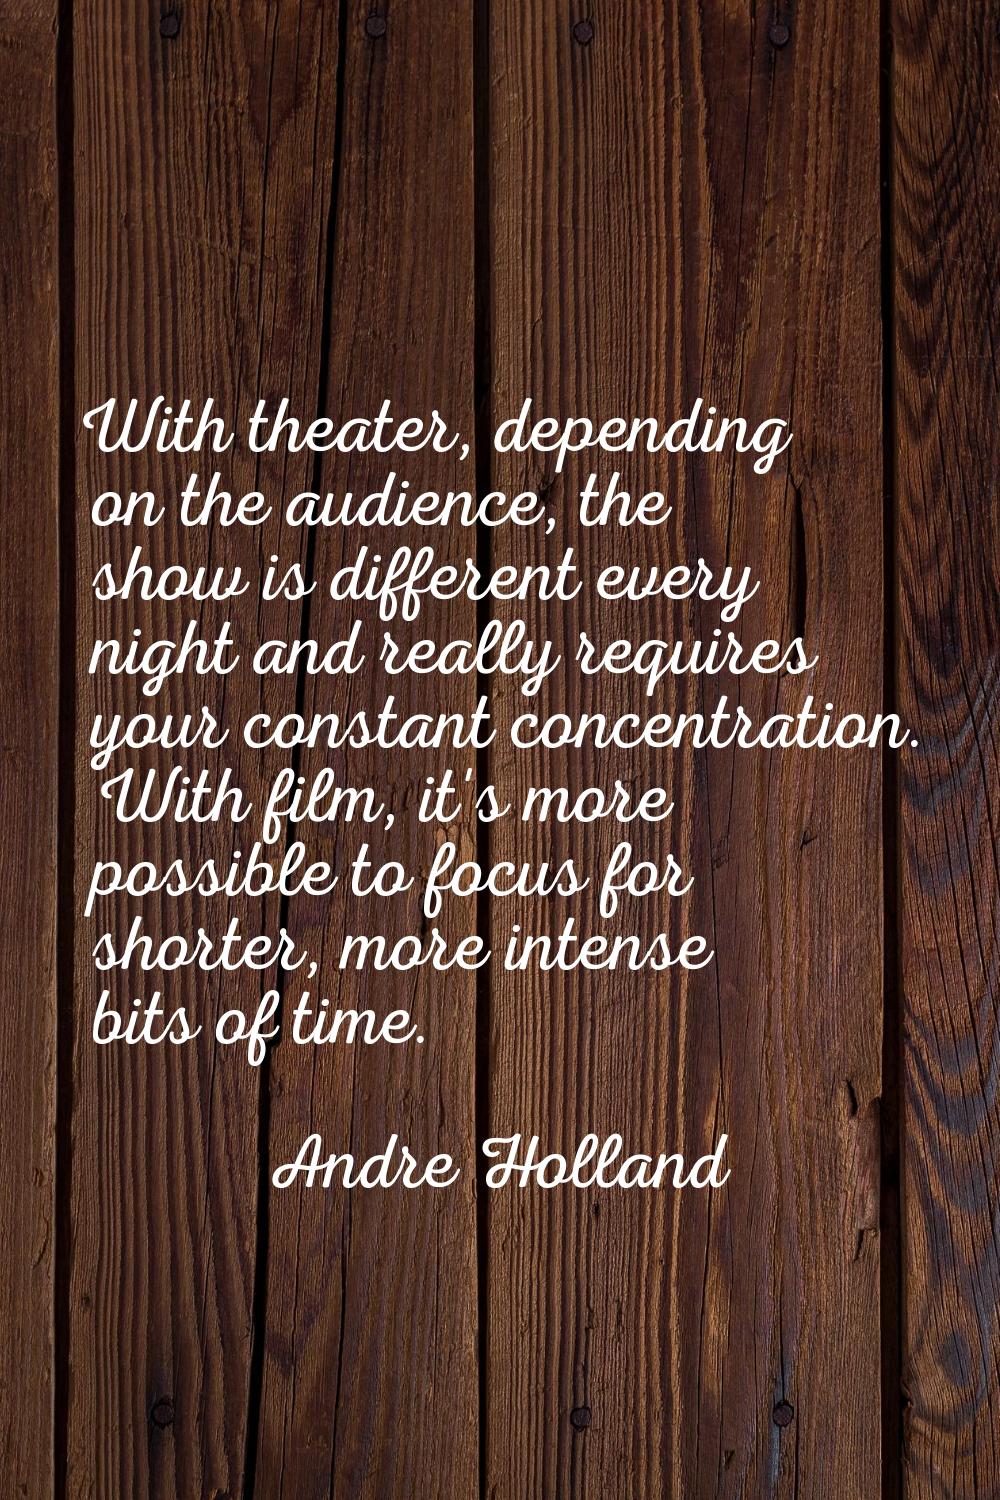 With theater, depending on the audience, the show is different every night and really requires your